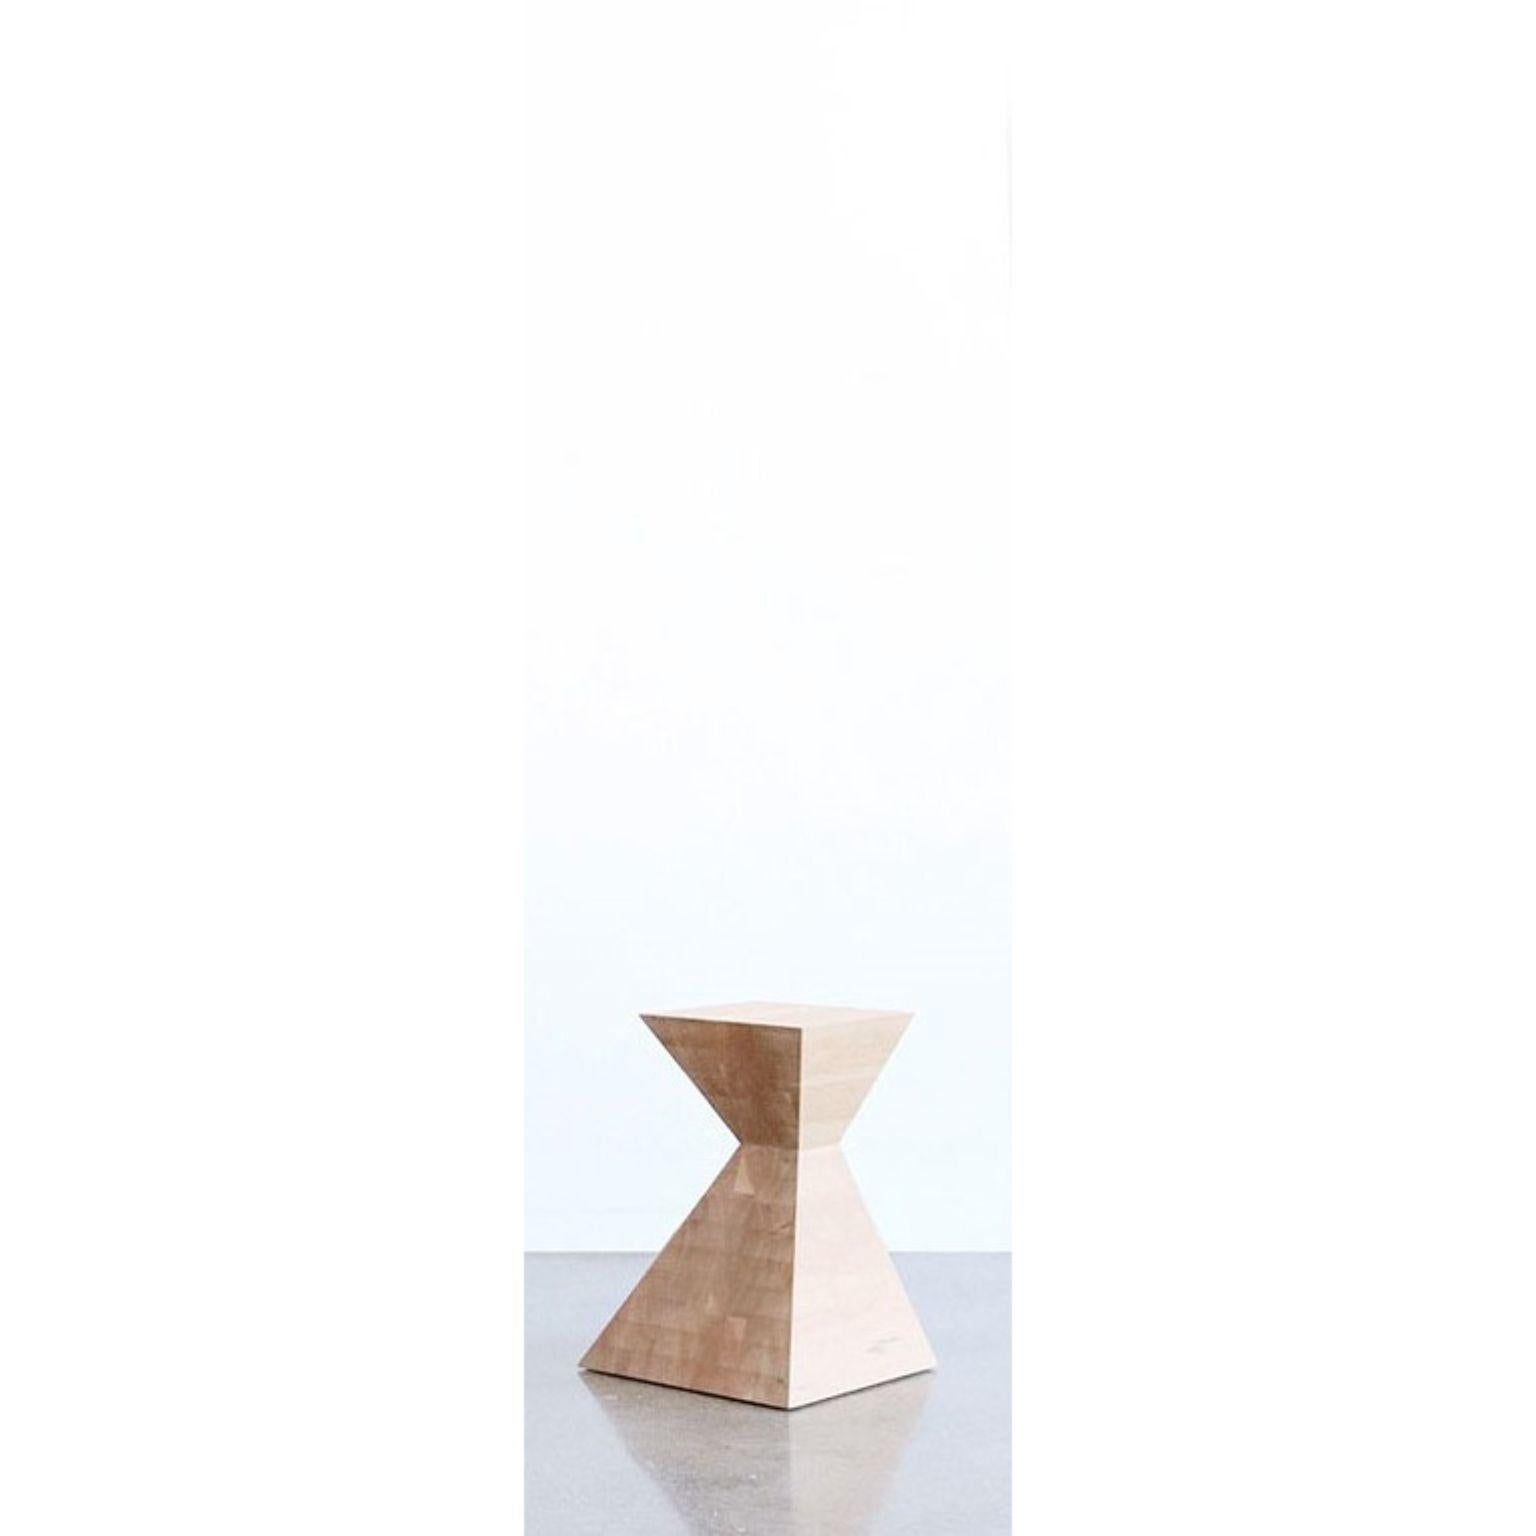 Squaretown stool by HOLLIS + MORRIS
2014
Dimensions: 13” W x 13” D x 18” H
Materials: Solid wood, hardwax oil

Options Available:
Wood: W.Oak White, W.Oak Natural, W.Oak Black Walnut

An imaginative, reversible stool that invites possibility